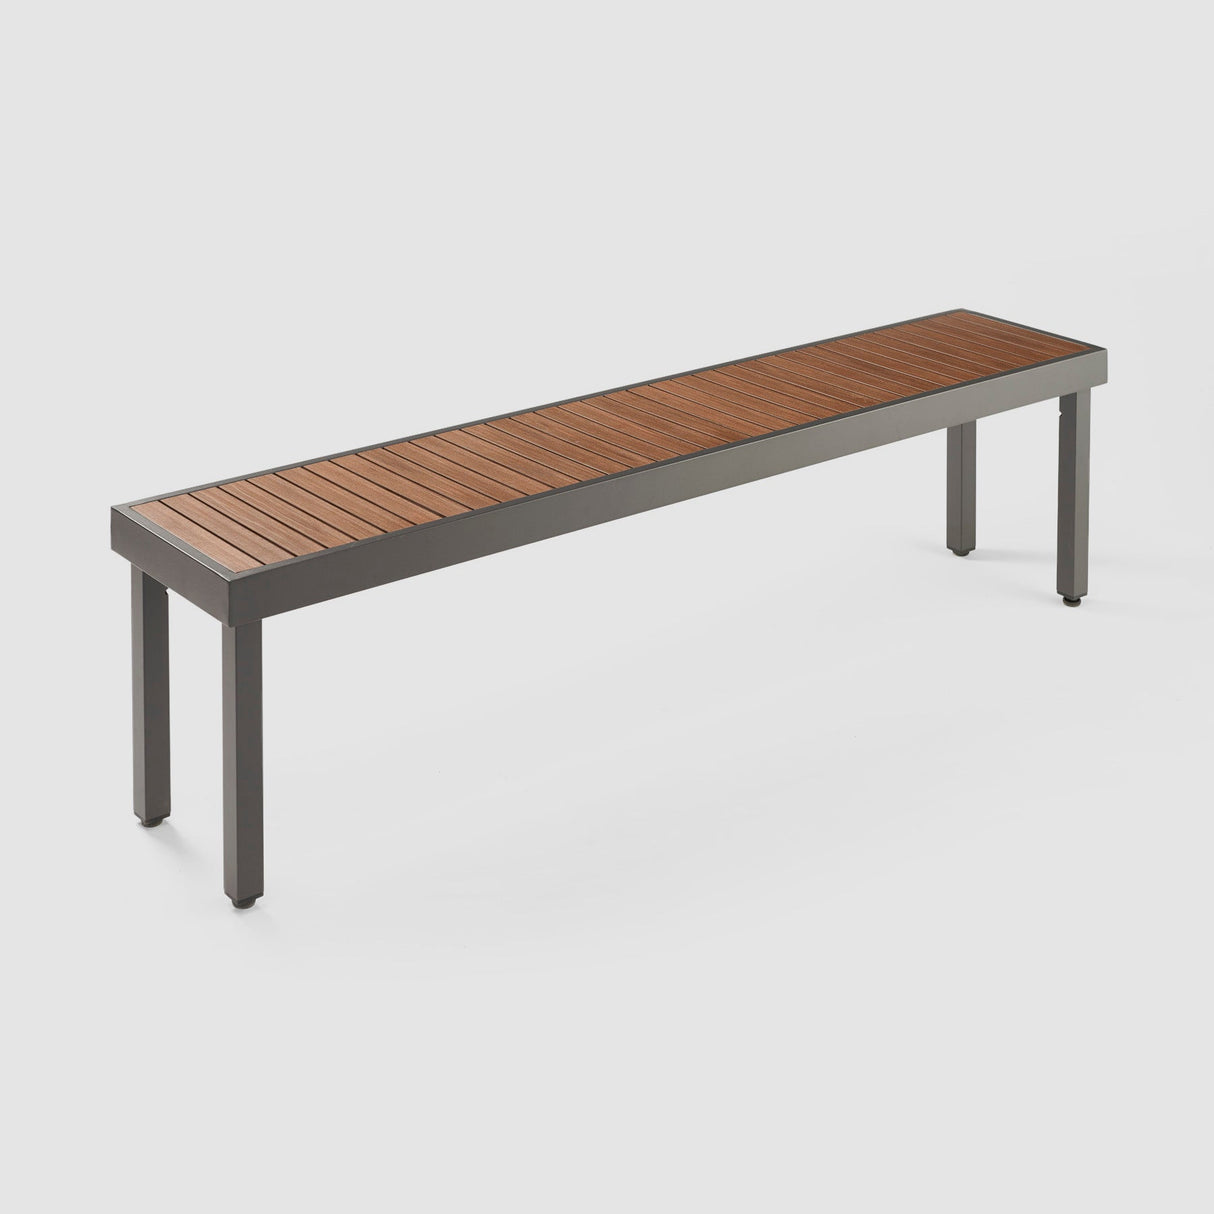 The Kenwood Long Bench on a grey background